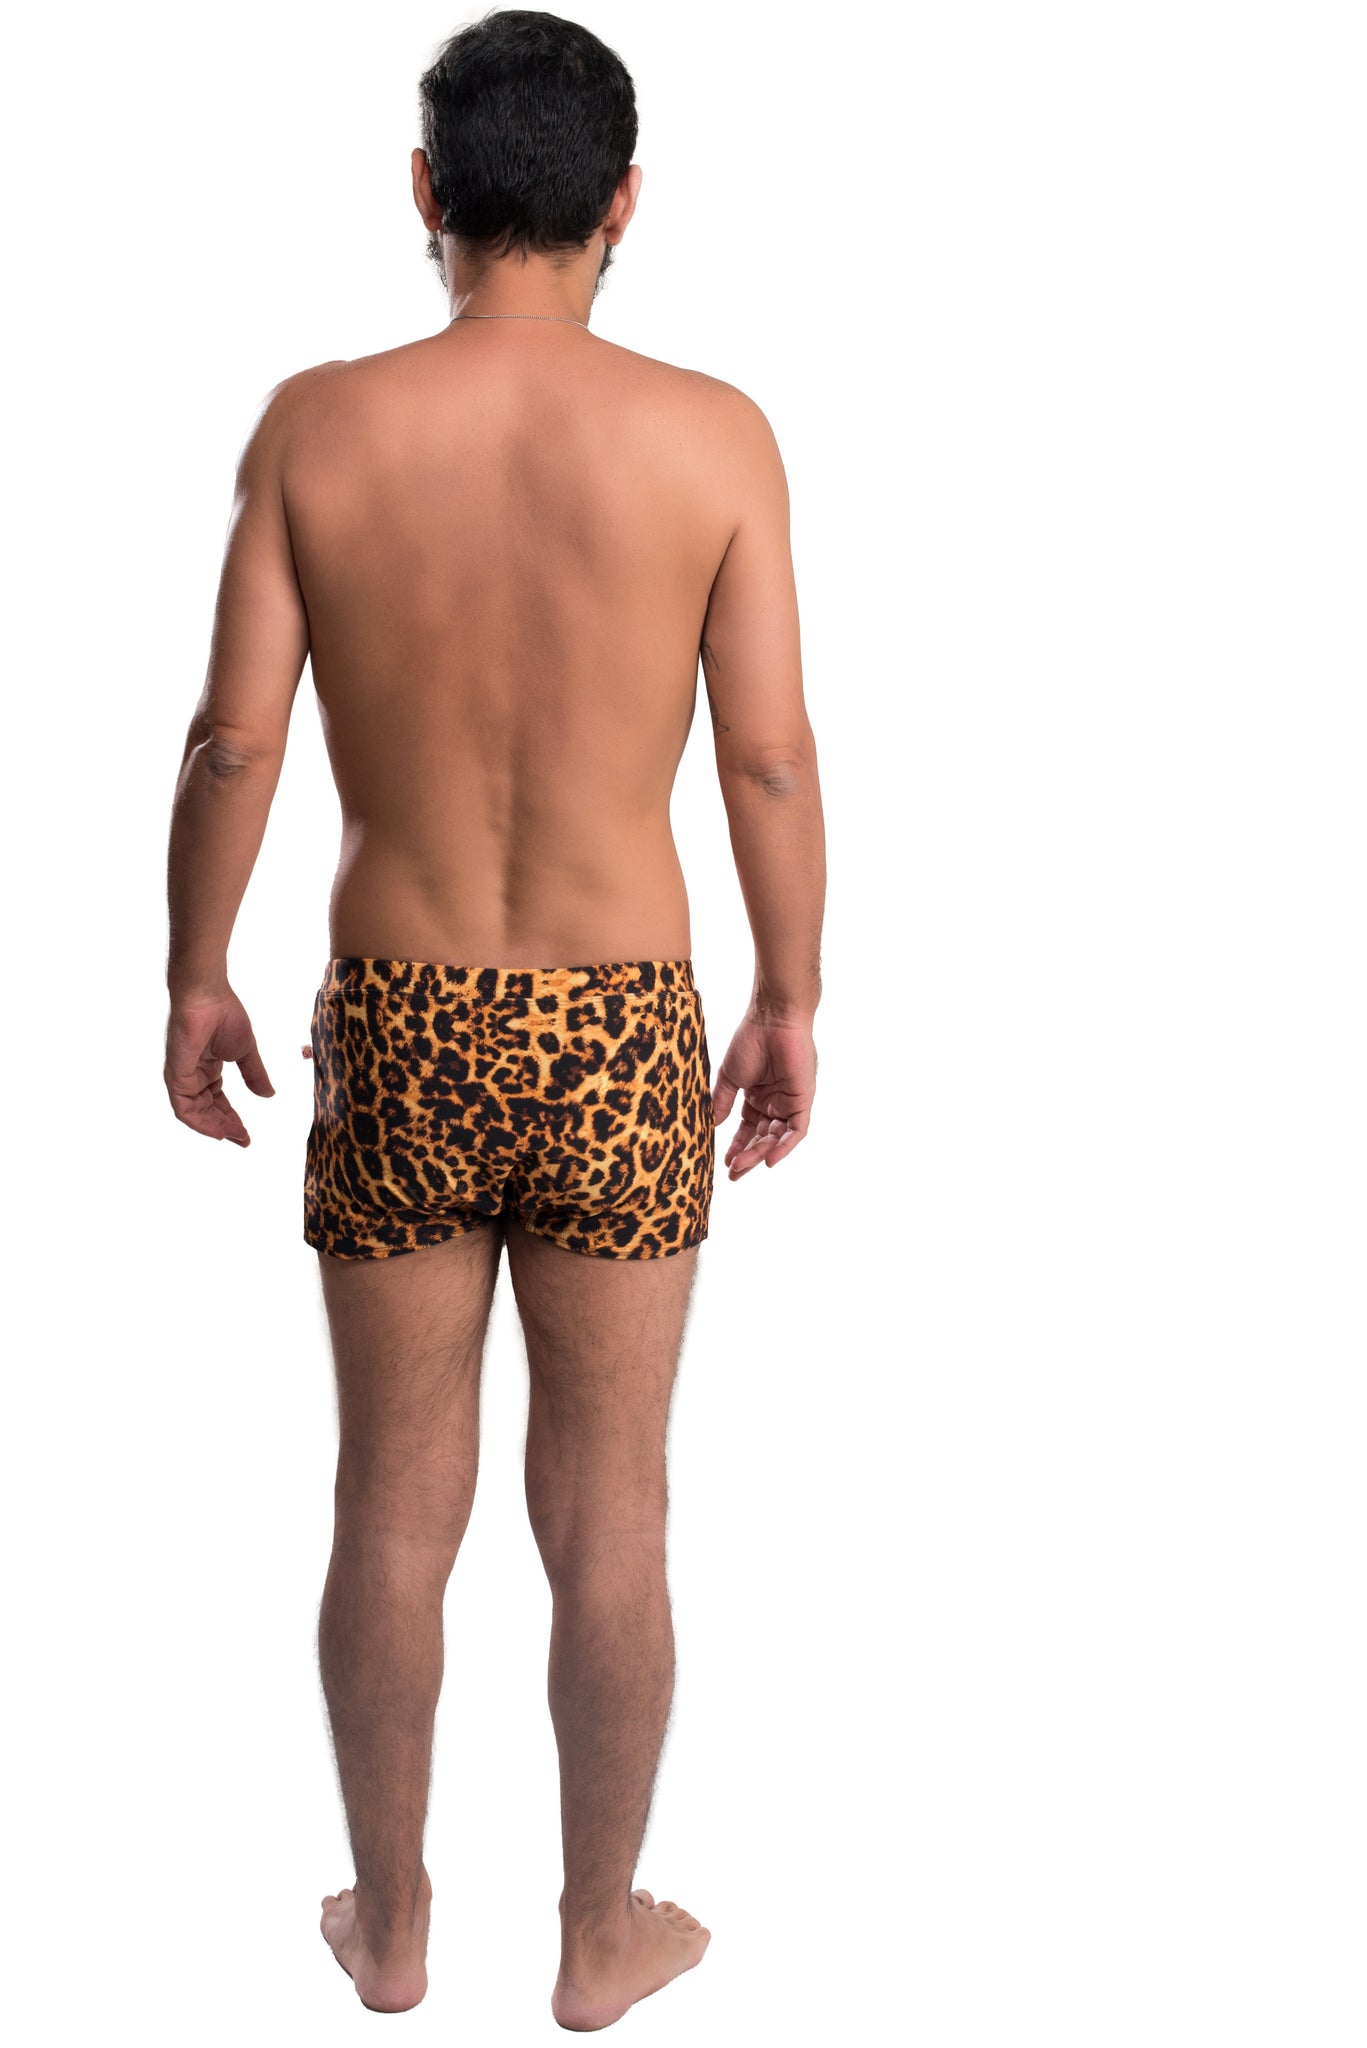 Brazilian Style Trunks, Bengal Tiger, Cool Form Light